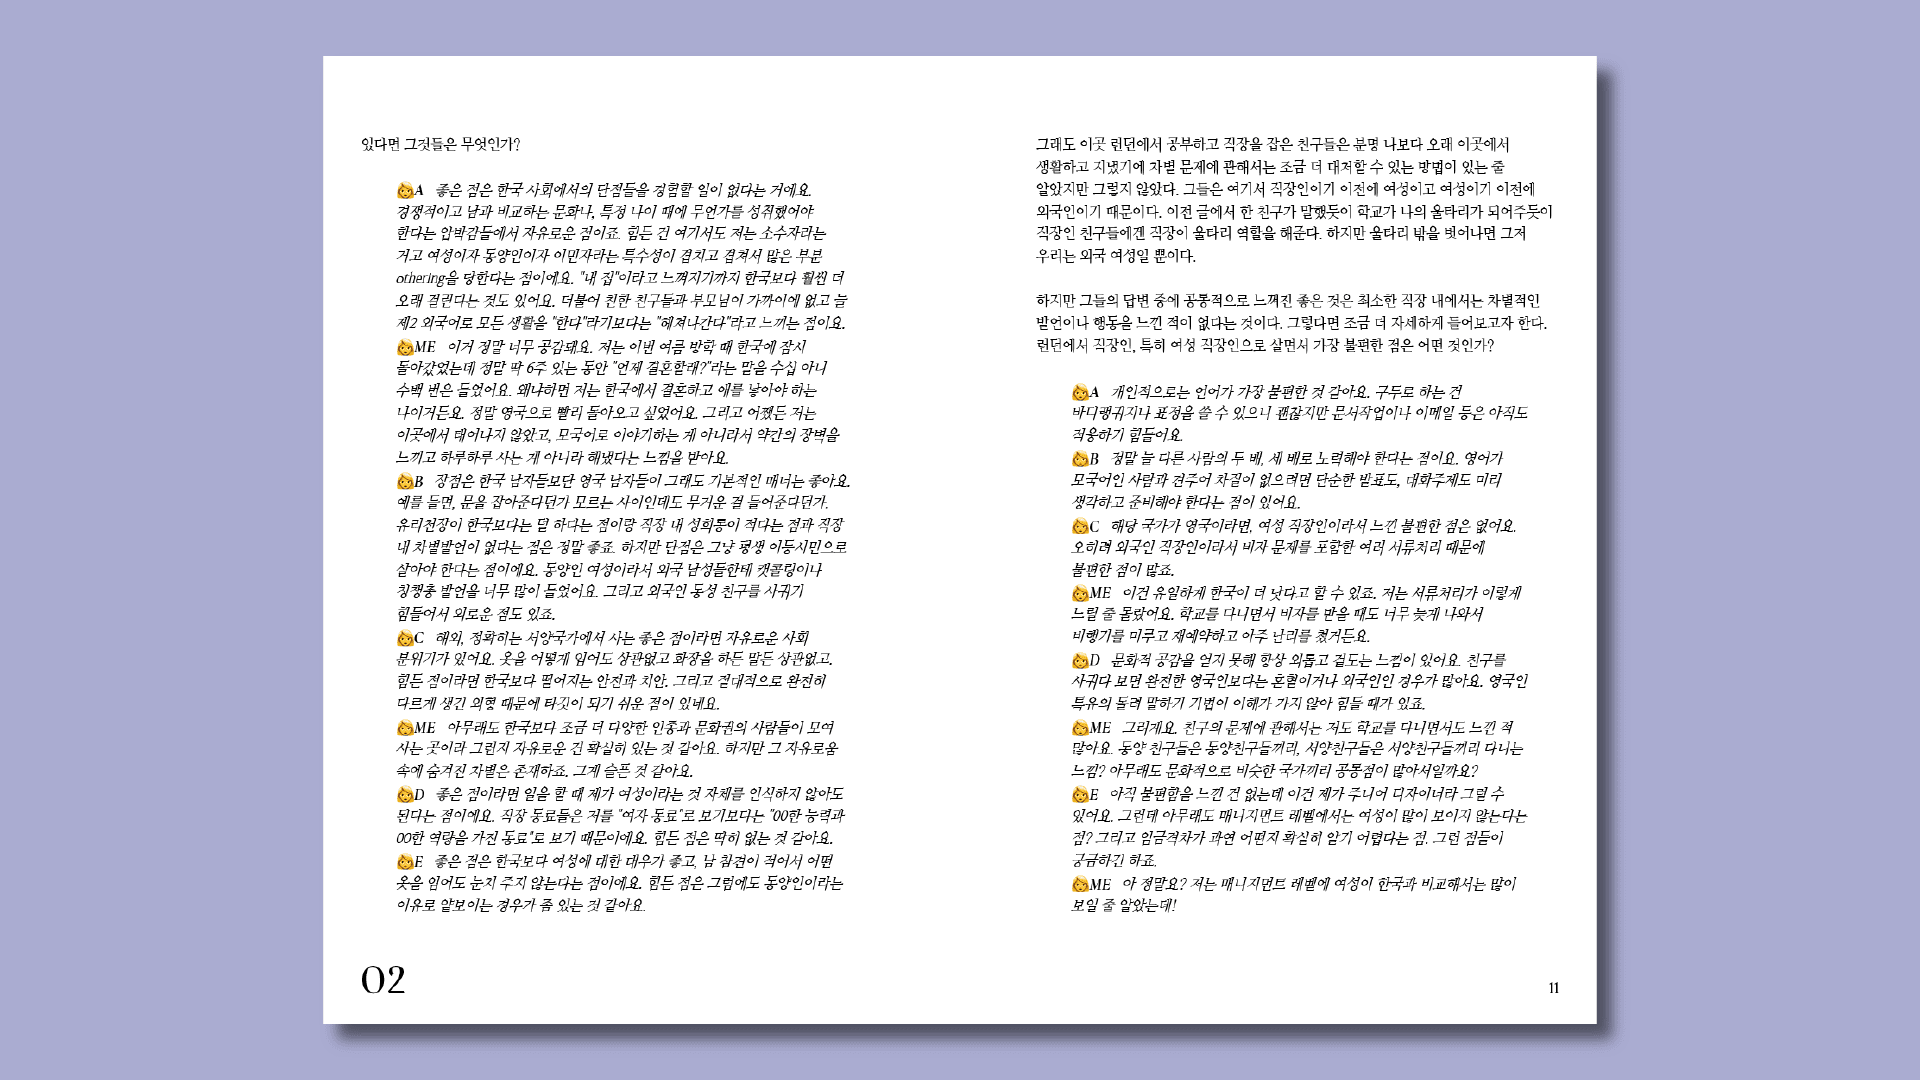 Detailed inner page of book part 2 in Korean